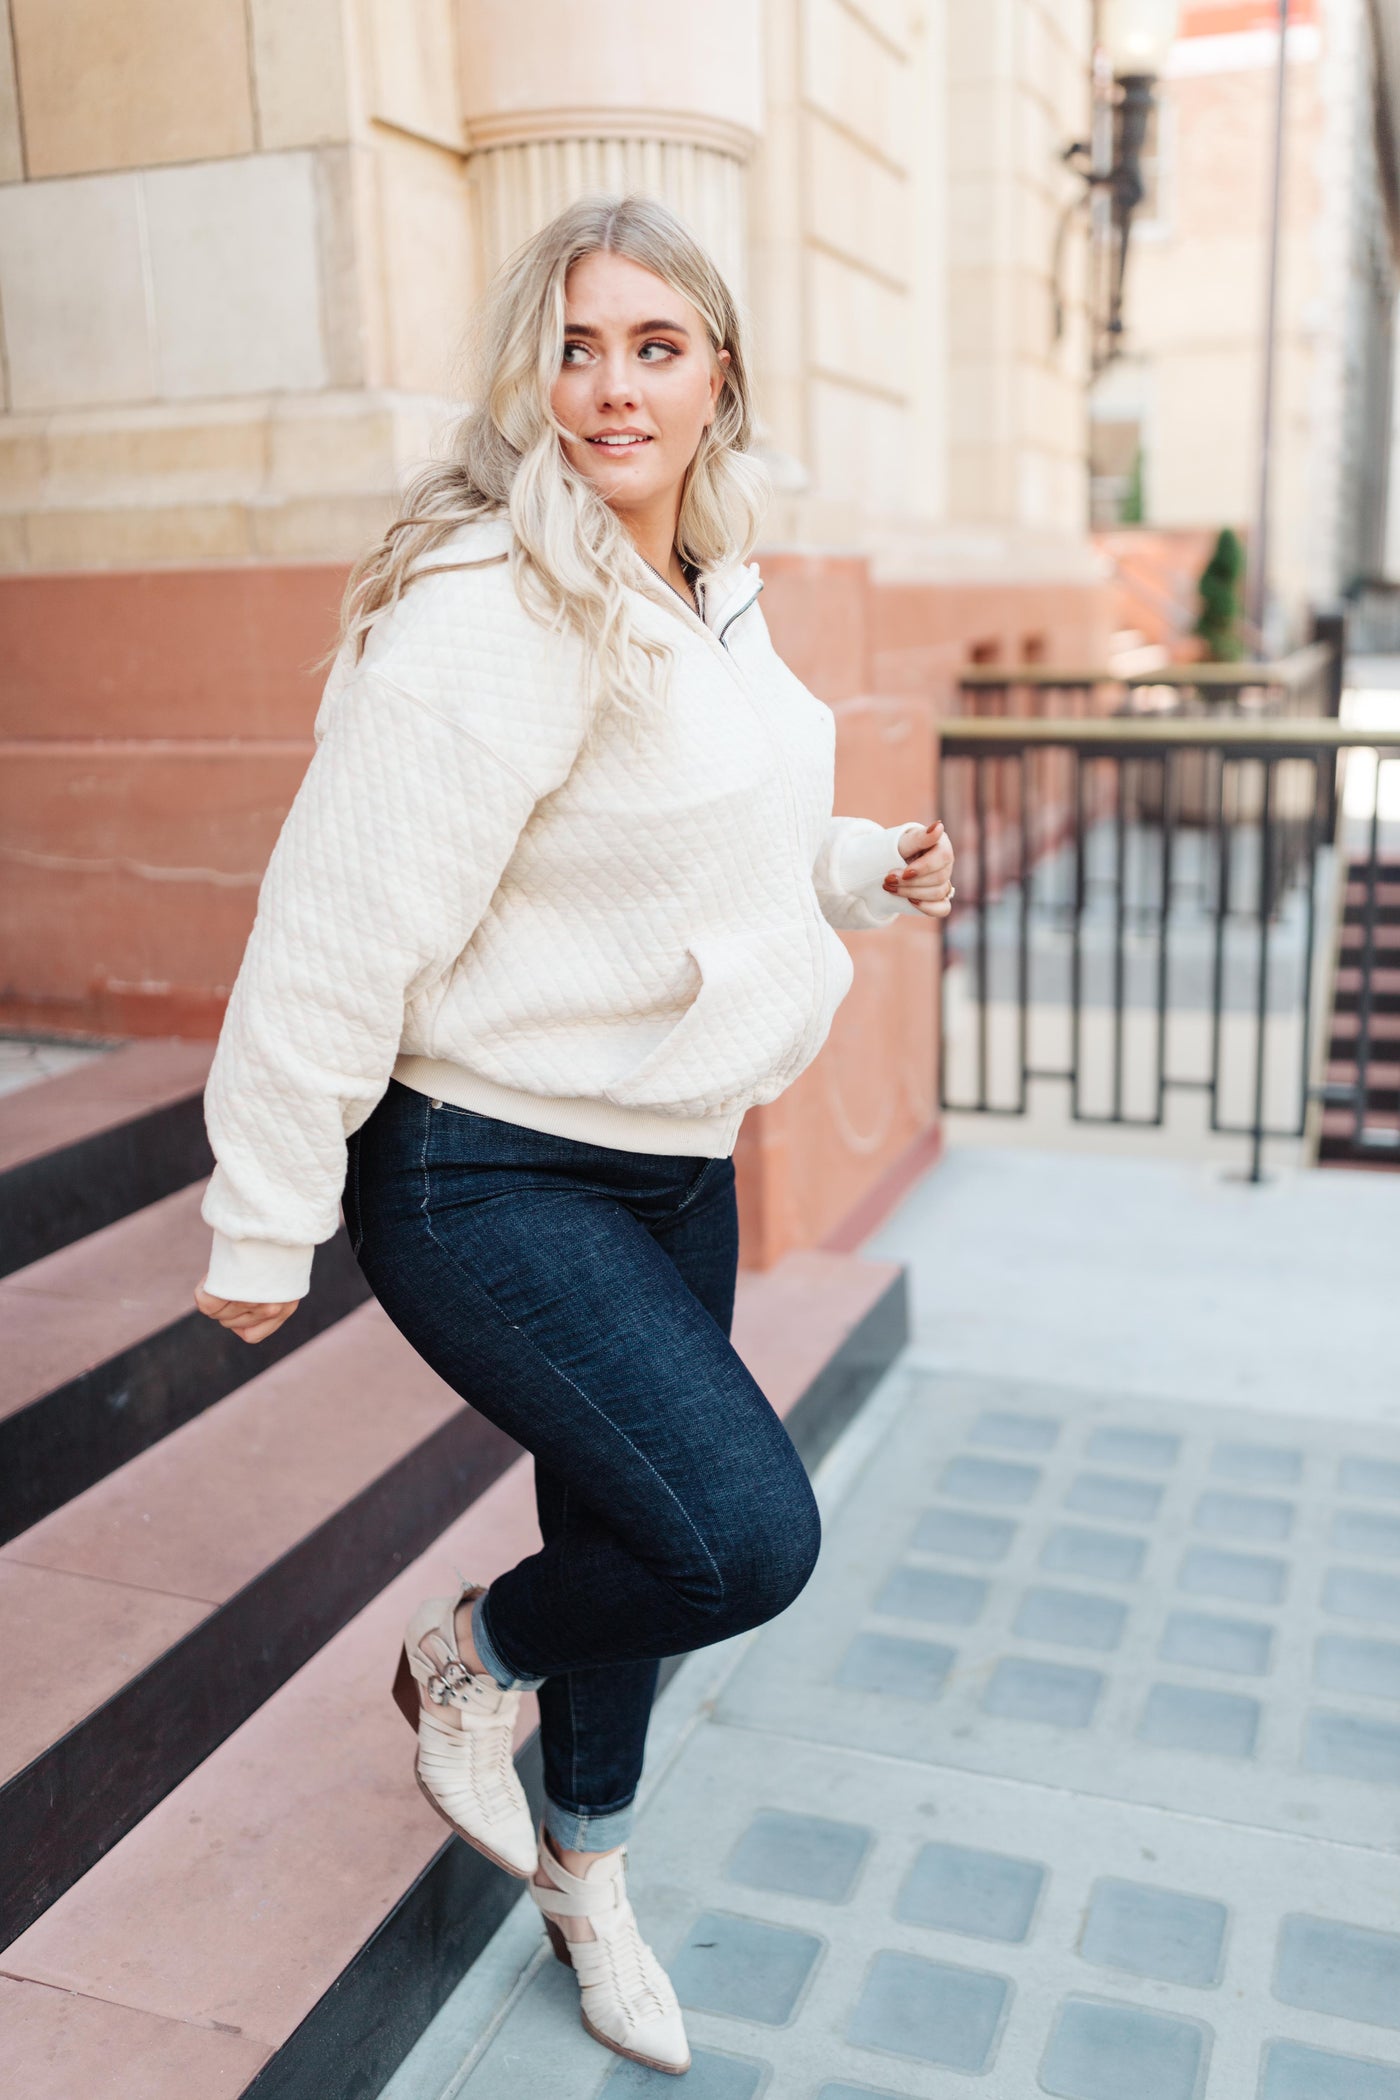 Keep Me Cozy Quilted Jacket in Cream